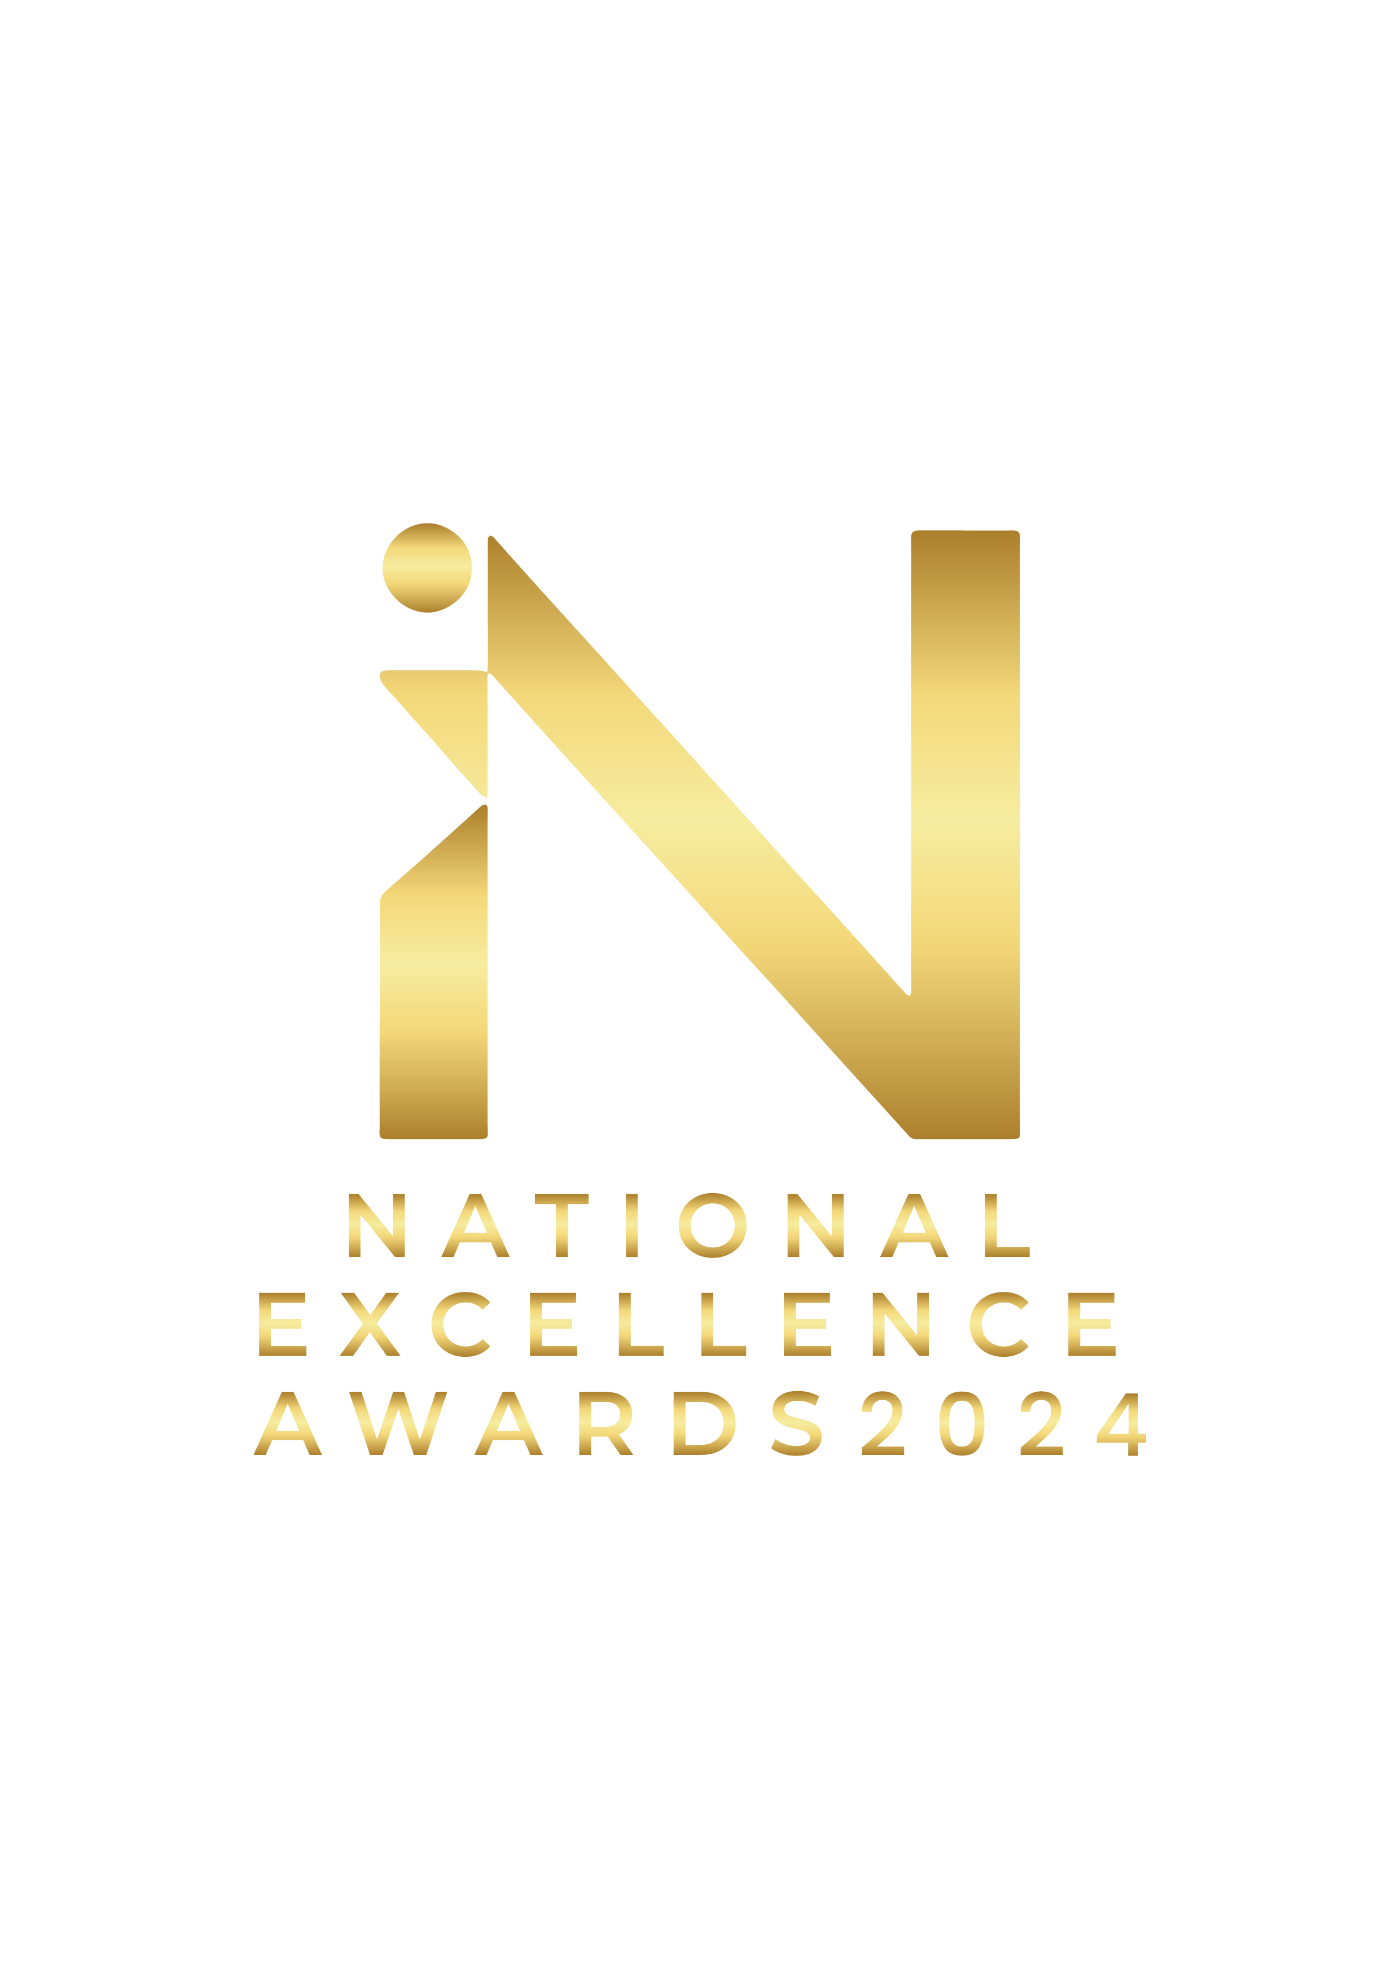 National Excellence Awards 2024 Organized by Kiteskraft Productions LLP